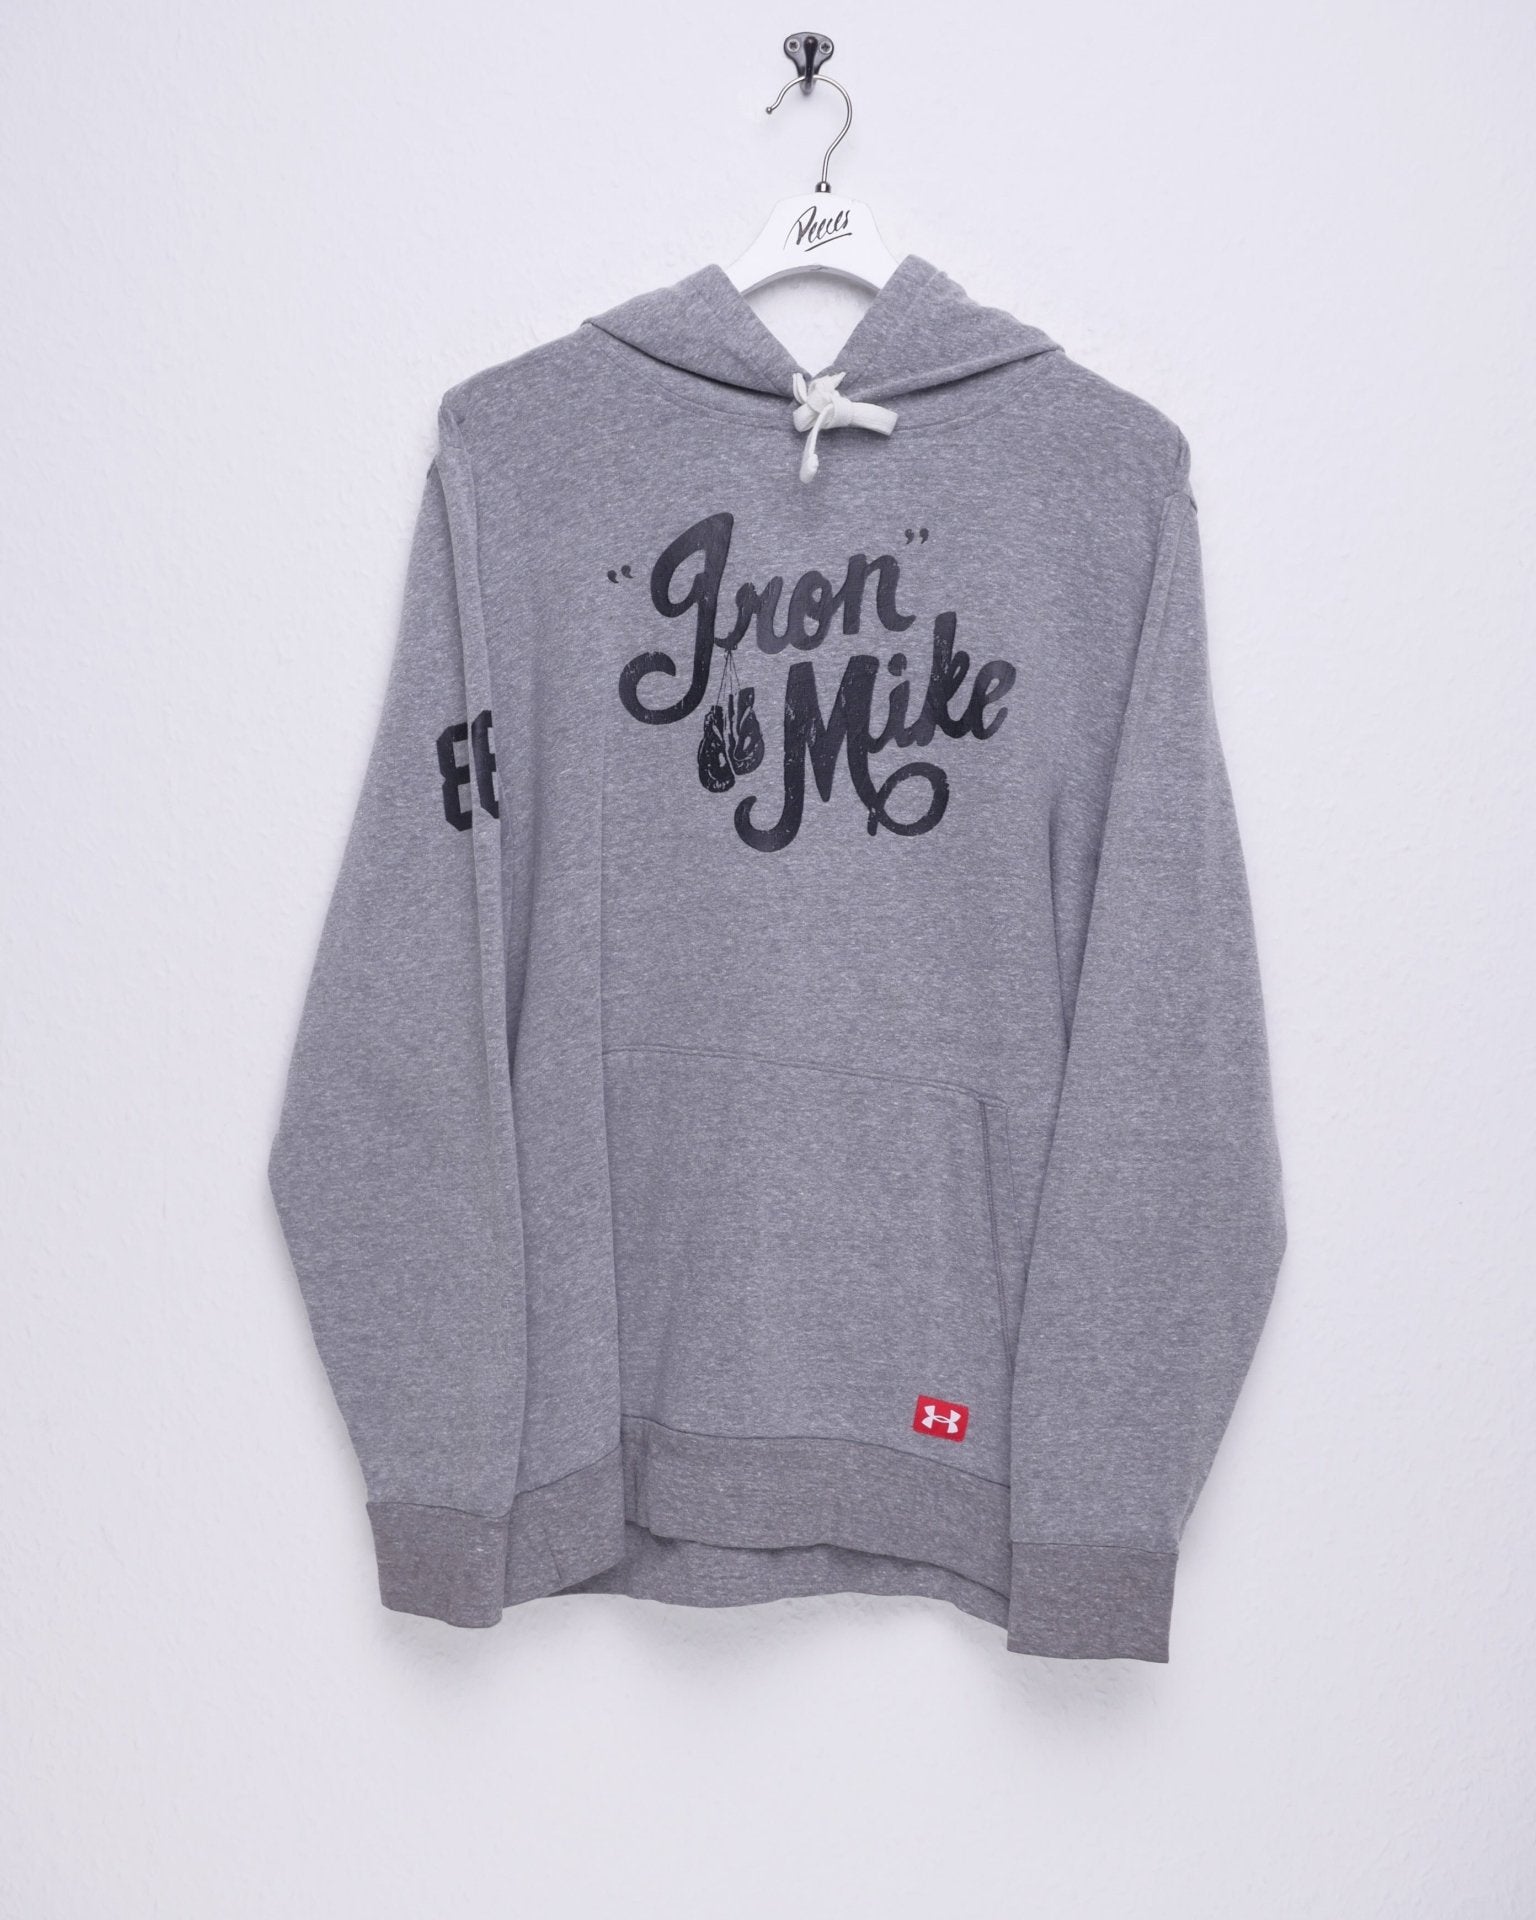 patched Logo grey Hoodie - Peeces